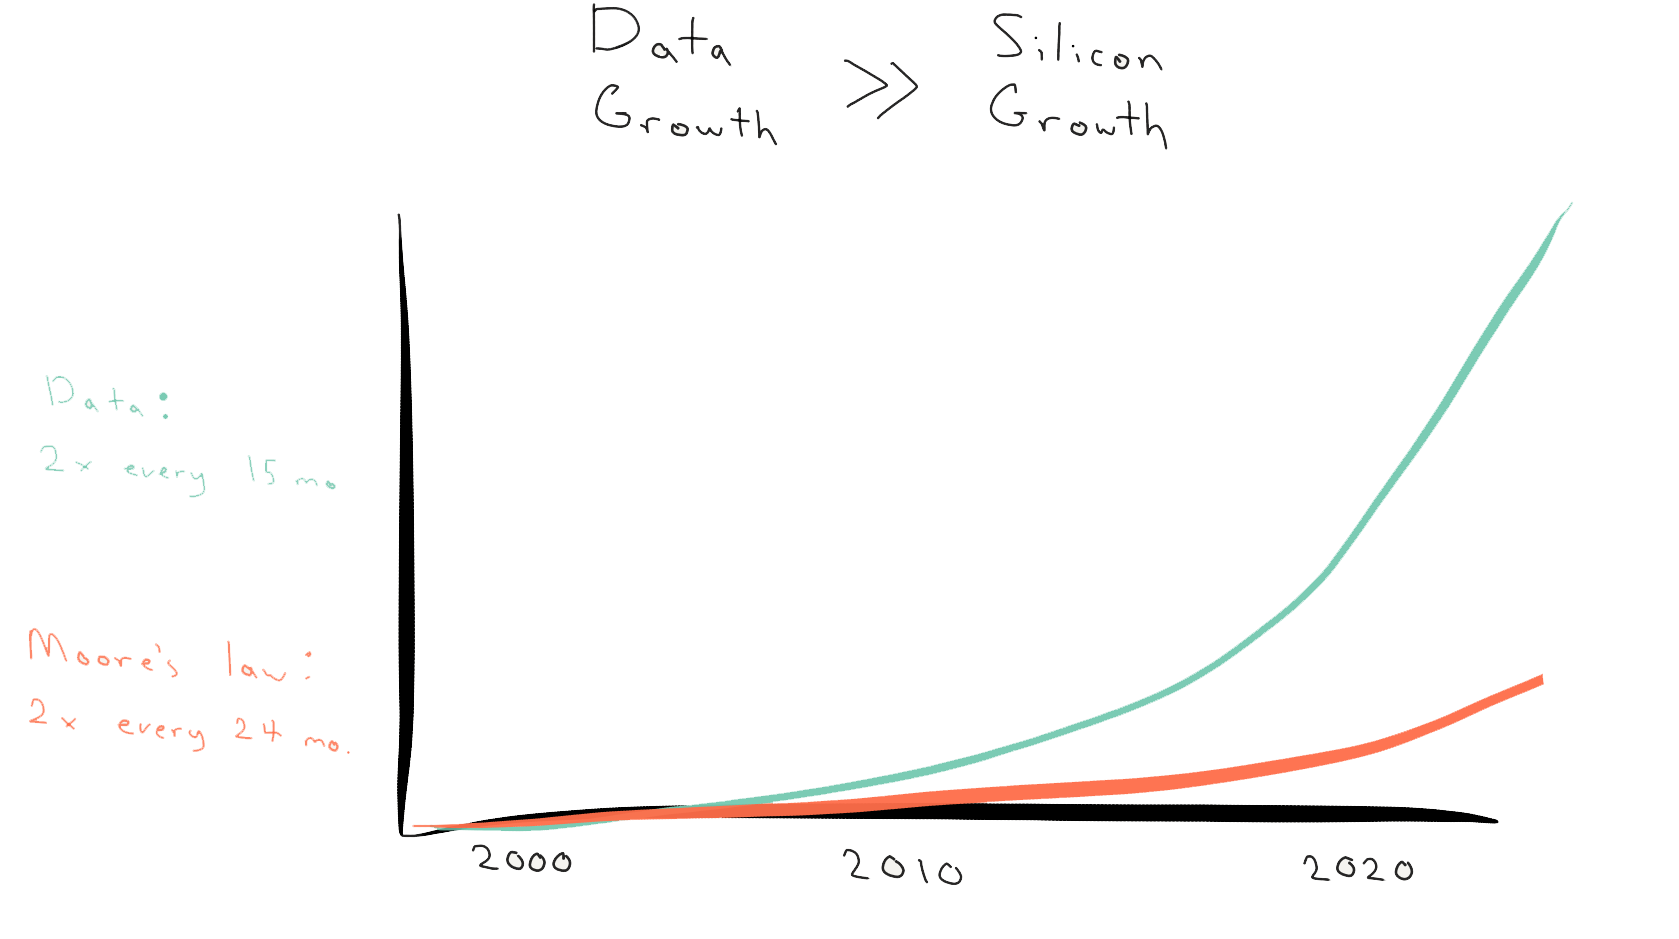 Data growth vs moores law